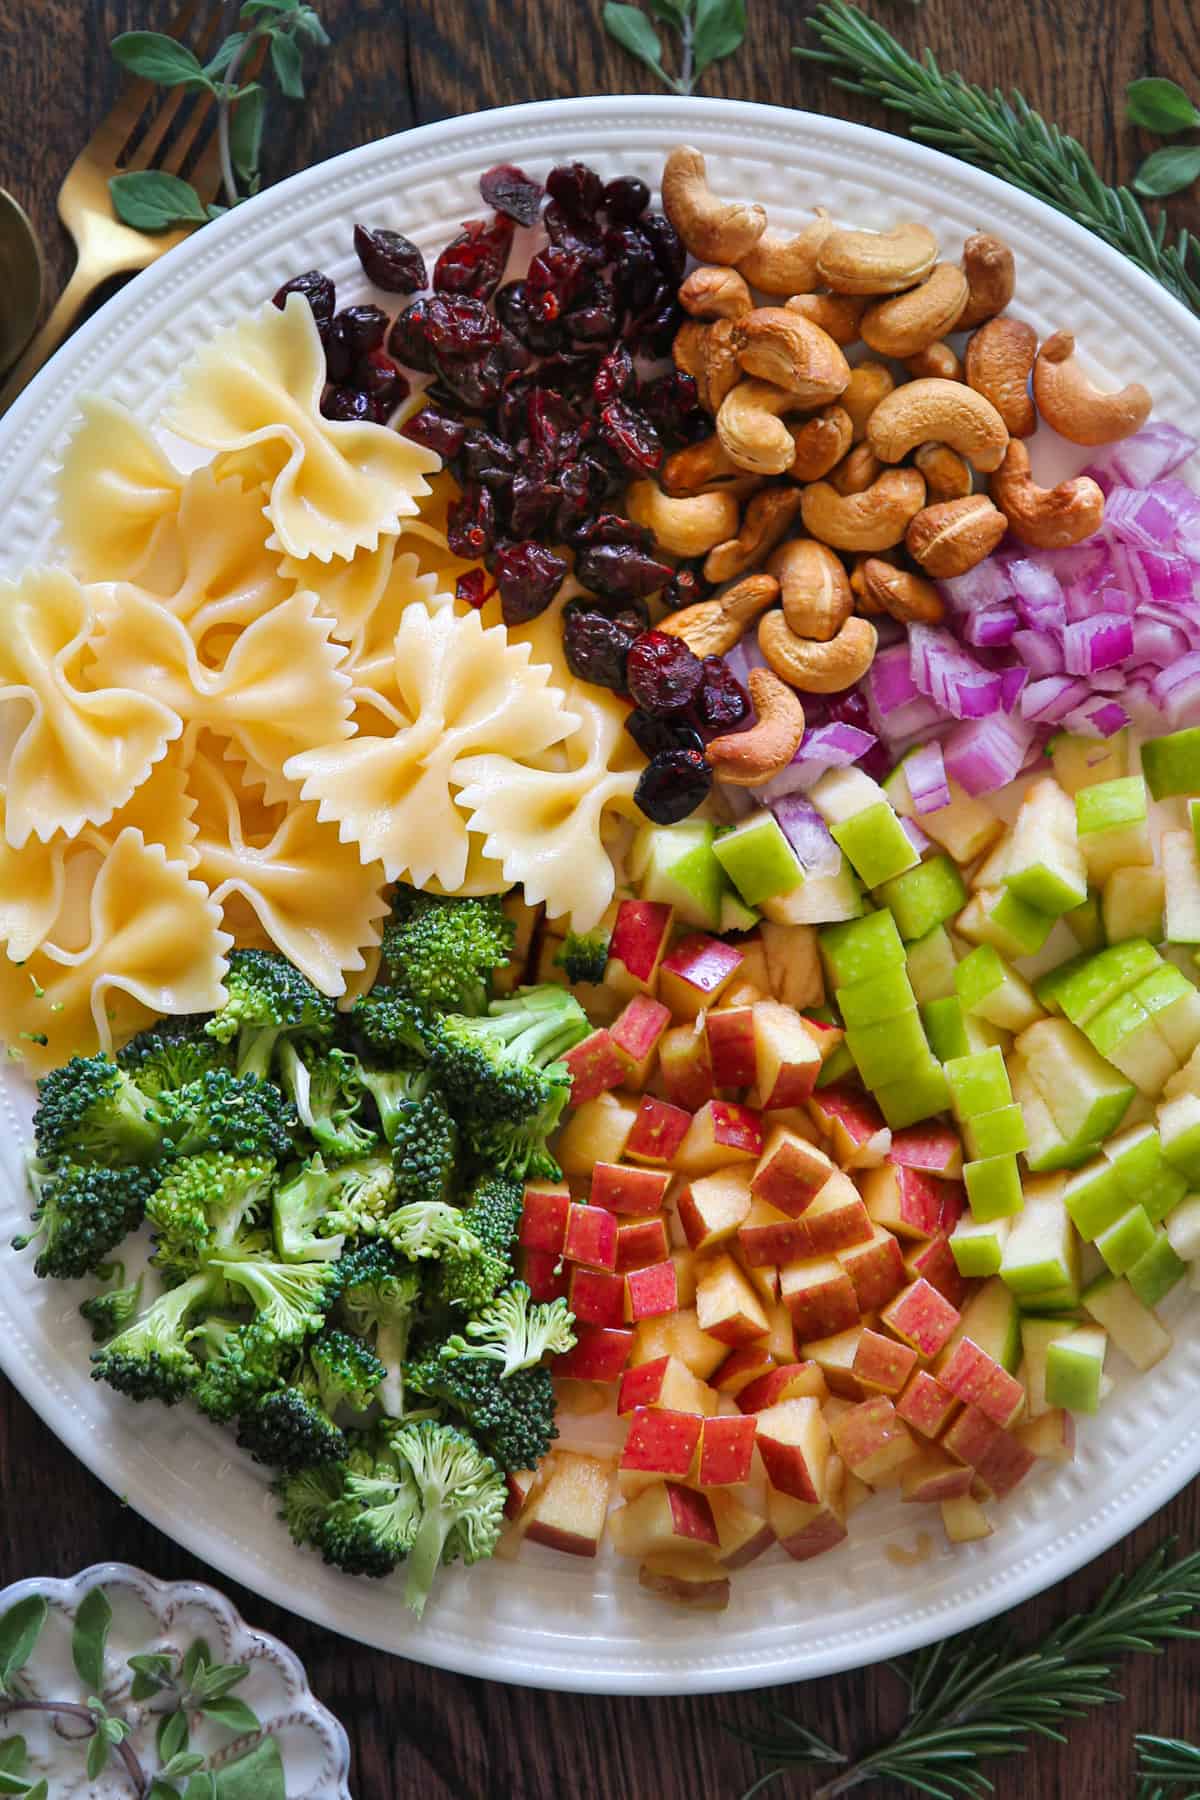 Ingredients for Broccoli Pasta Salad with Cranberries, Apples, Cashews, and Red Onions on a white plate.